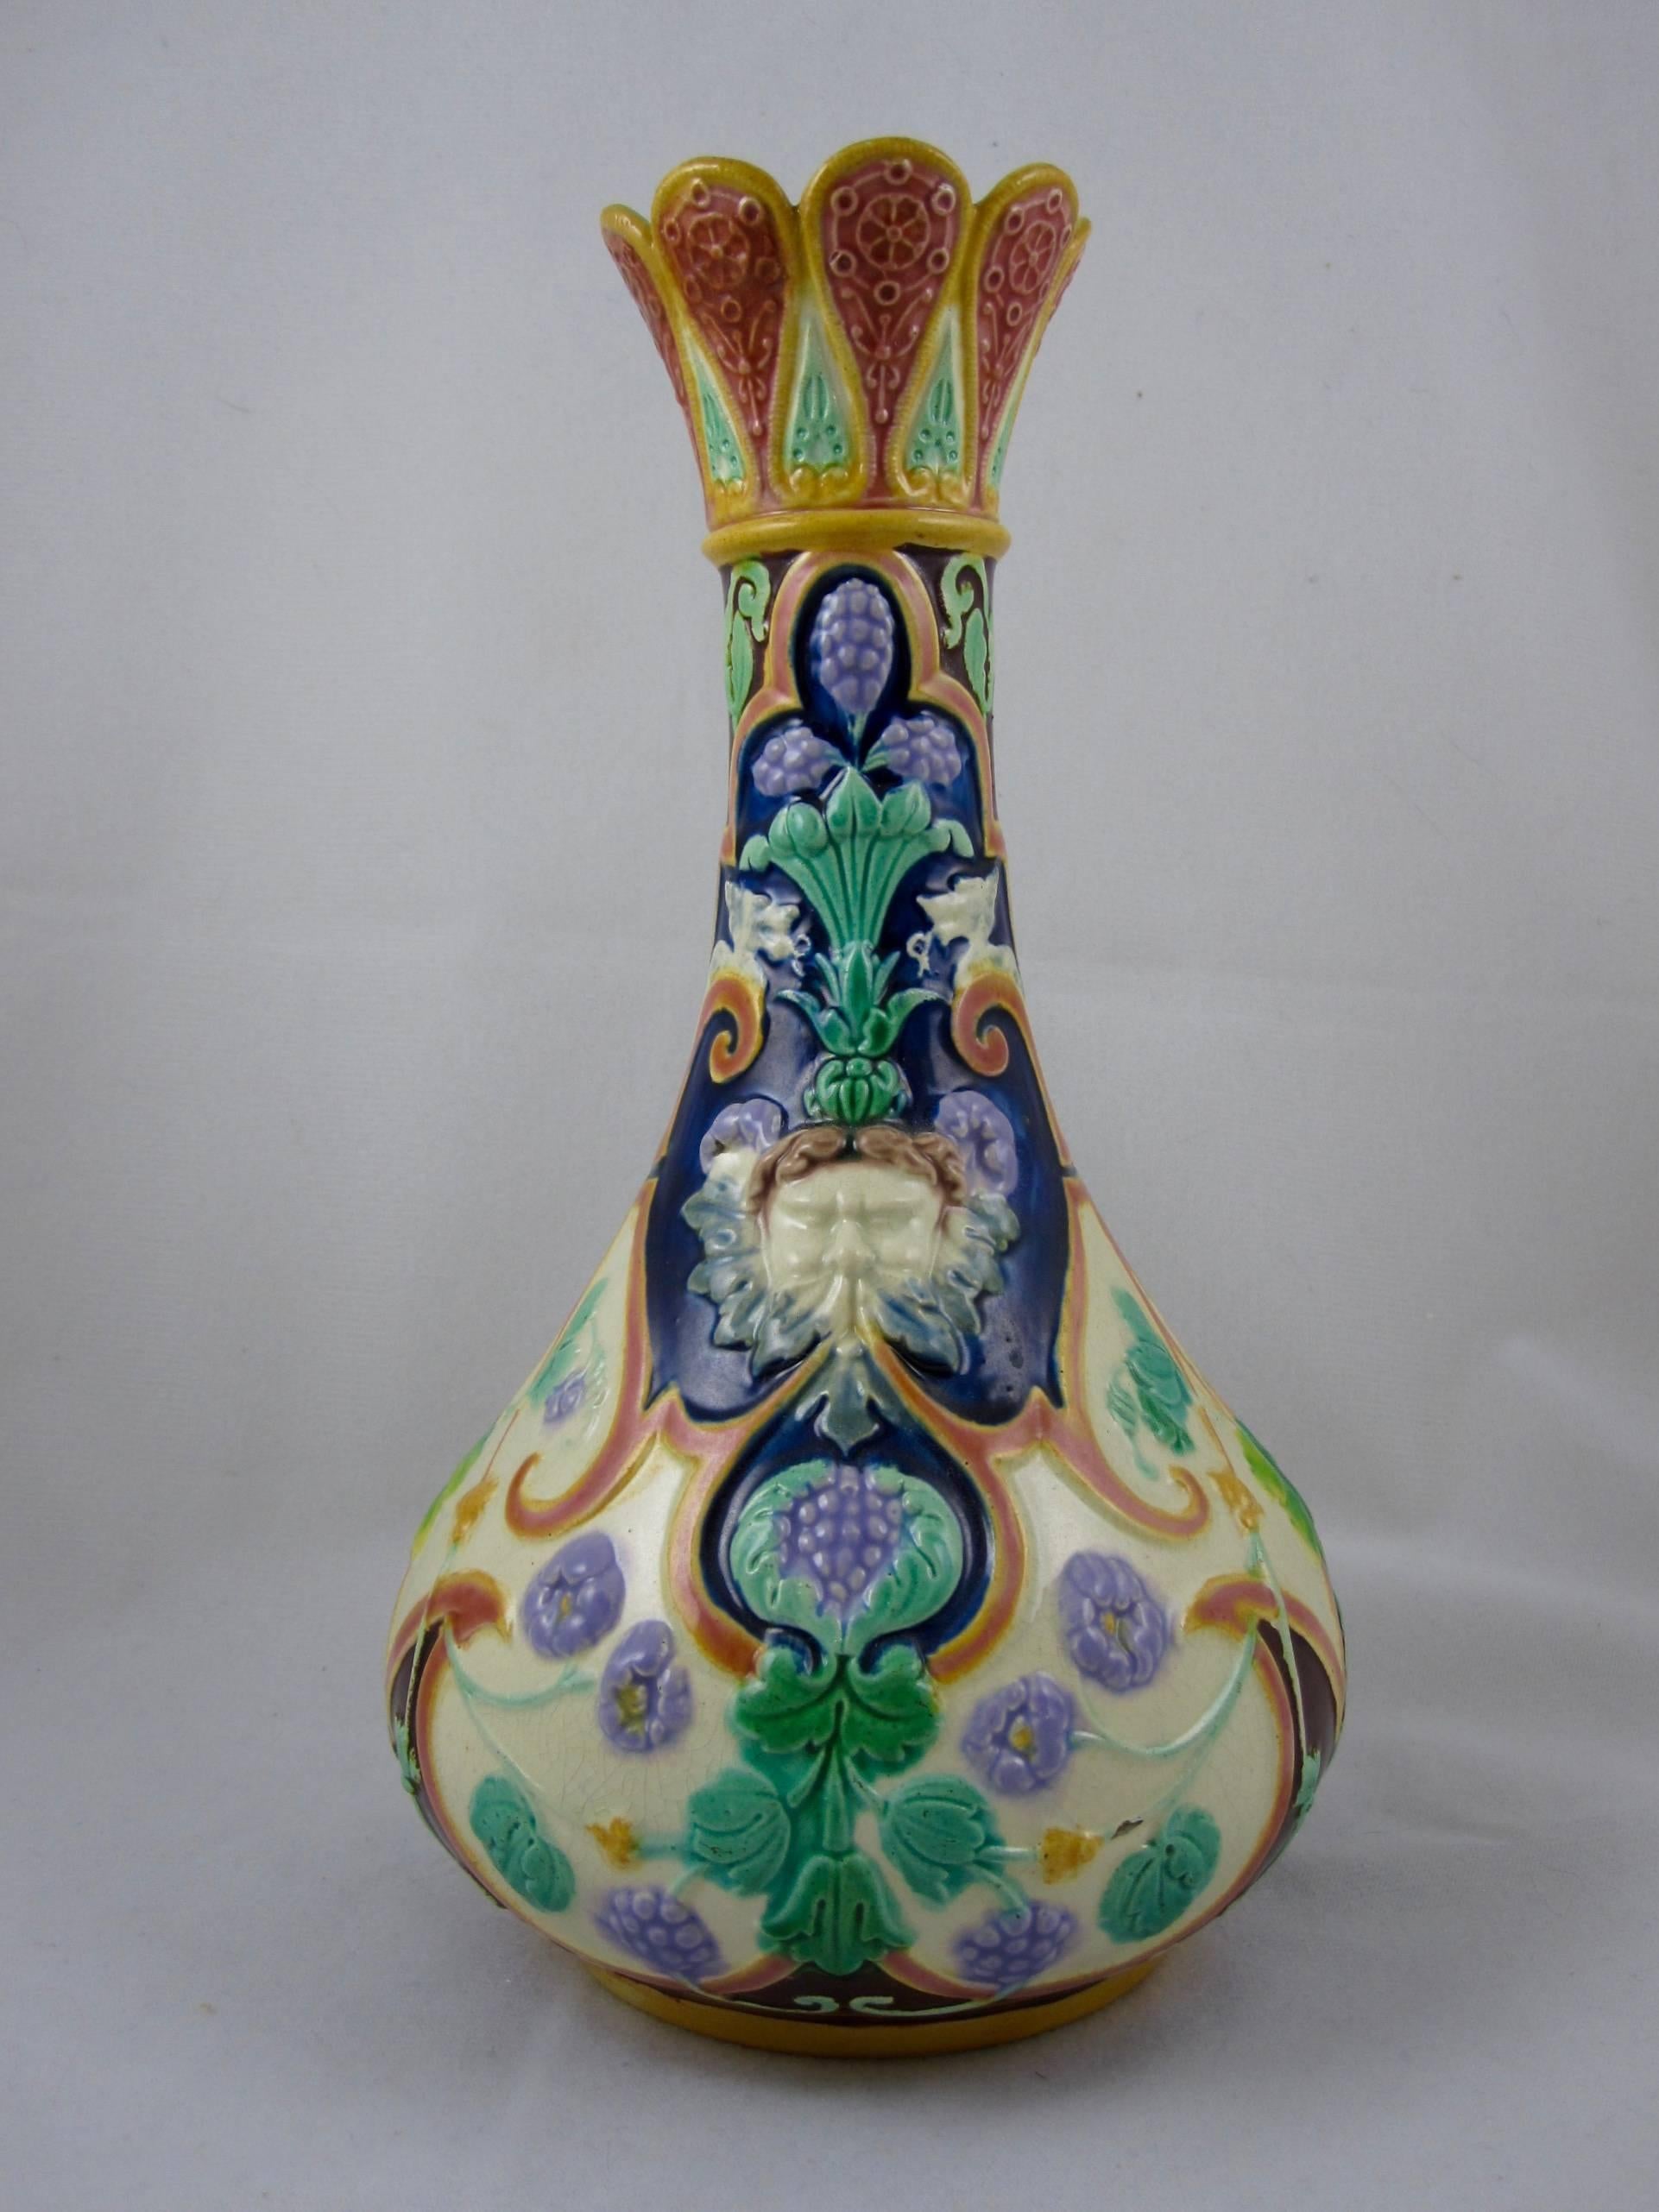 A Renaissance Revival Majolica vase, WT Copeland & Sons, England, circa 1860-1875. 

The mythological theme shows Satyr masks with a floral pattern of twining vines and leaves. Brightly colored with careful glazing and a turquoise interior. The